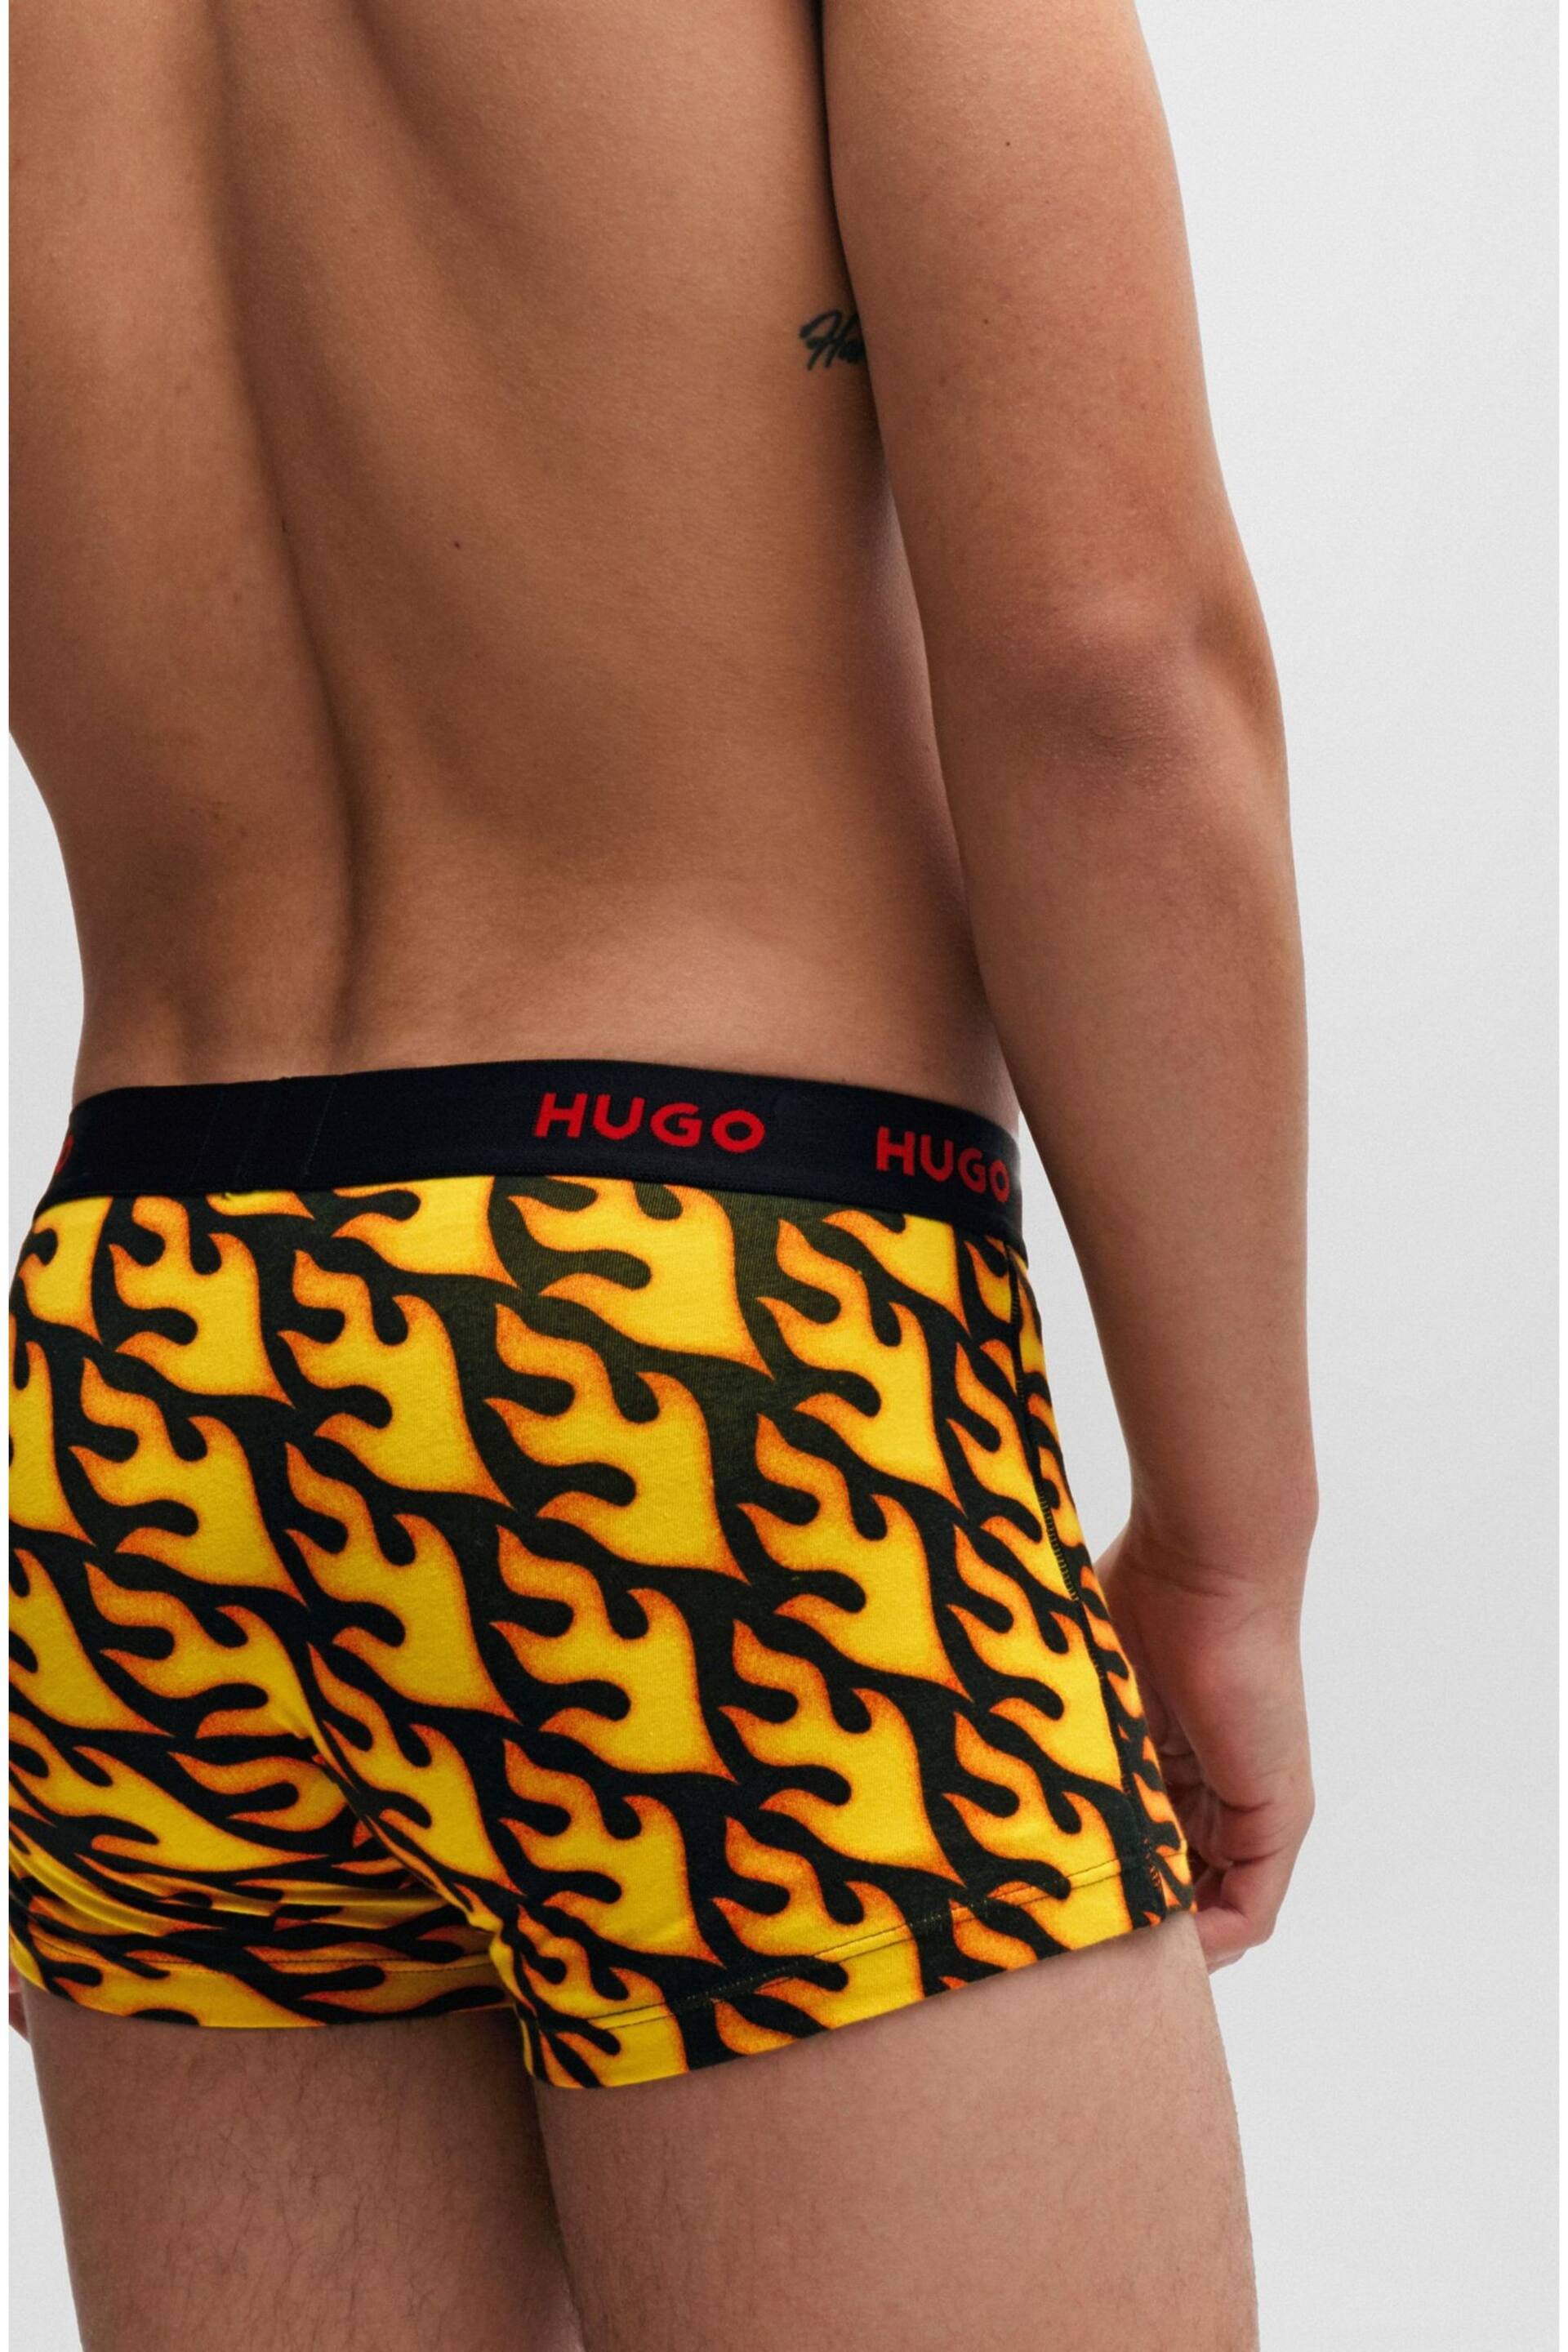 HUGO Red Patterned Stretch Cotton Logo Waistband 3-Pack Boxer Trunk - Image 7 of 7